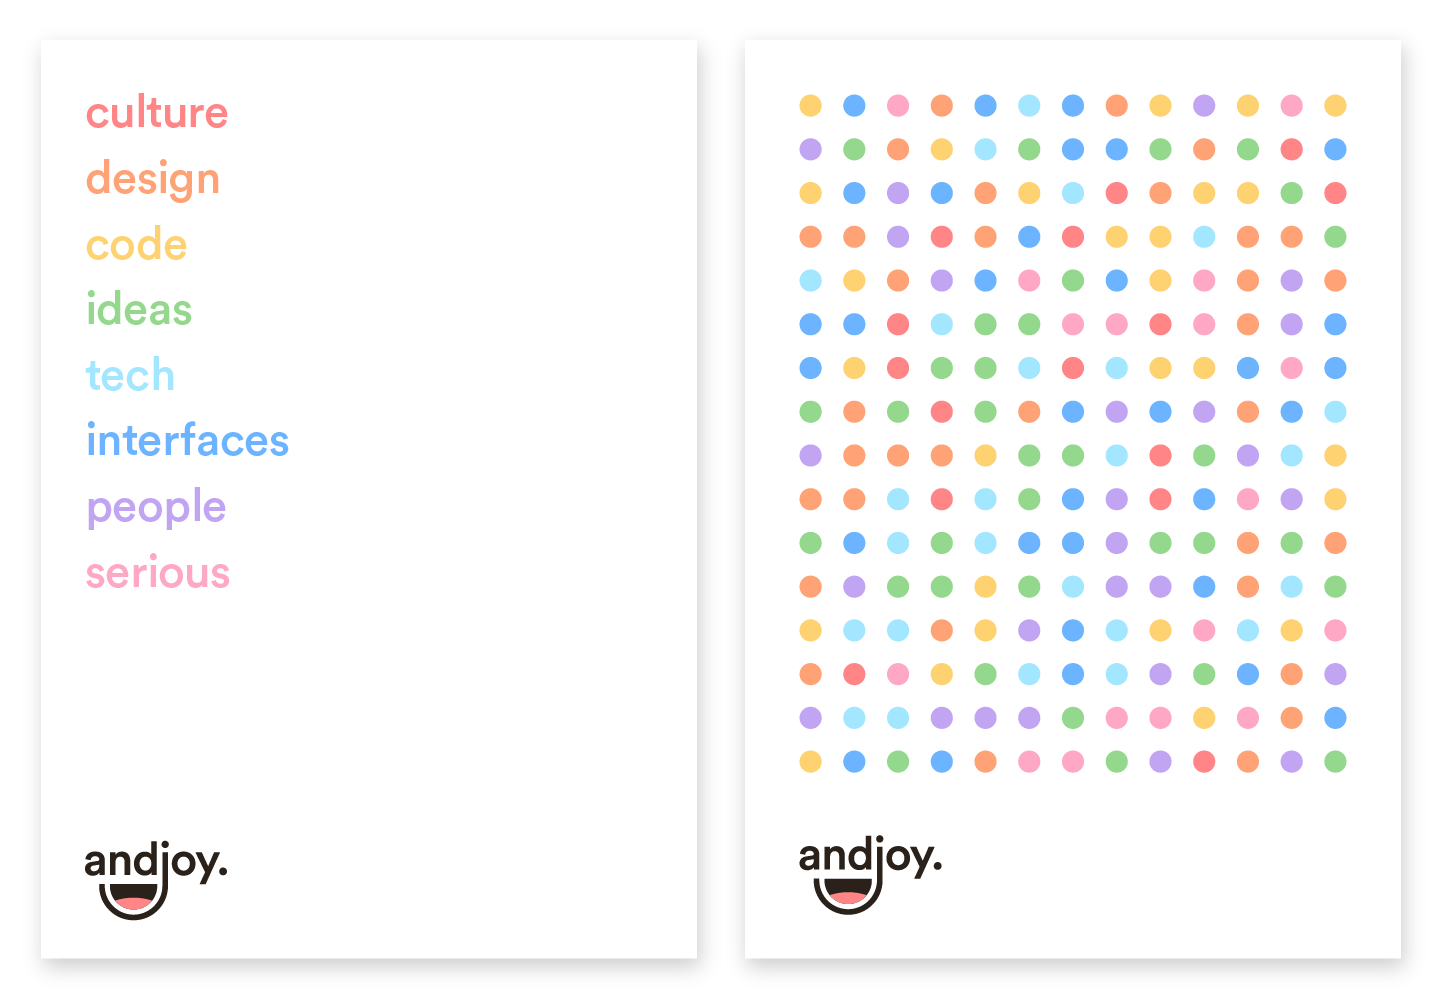 Two posters composed with brand identity key words and plenty of colored dots